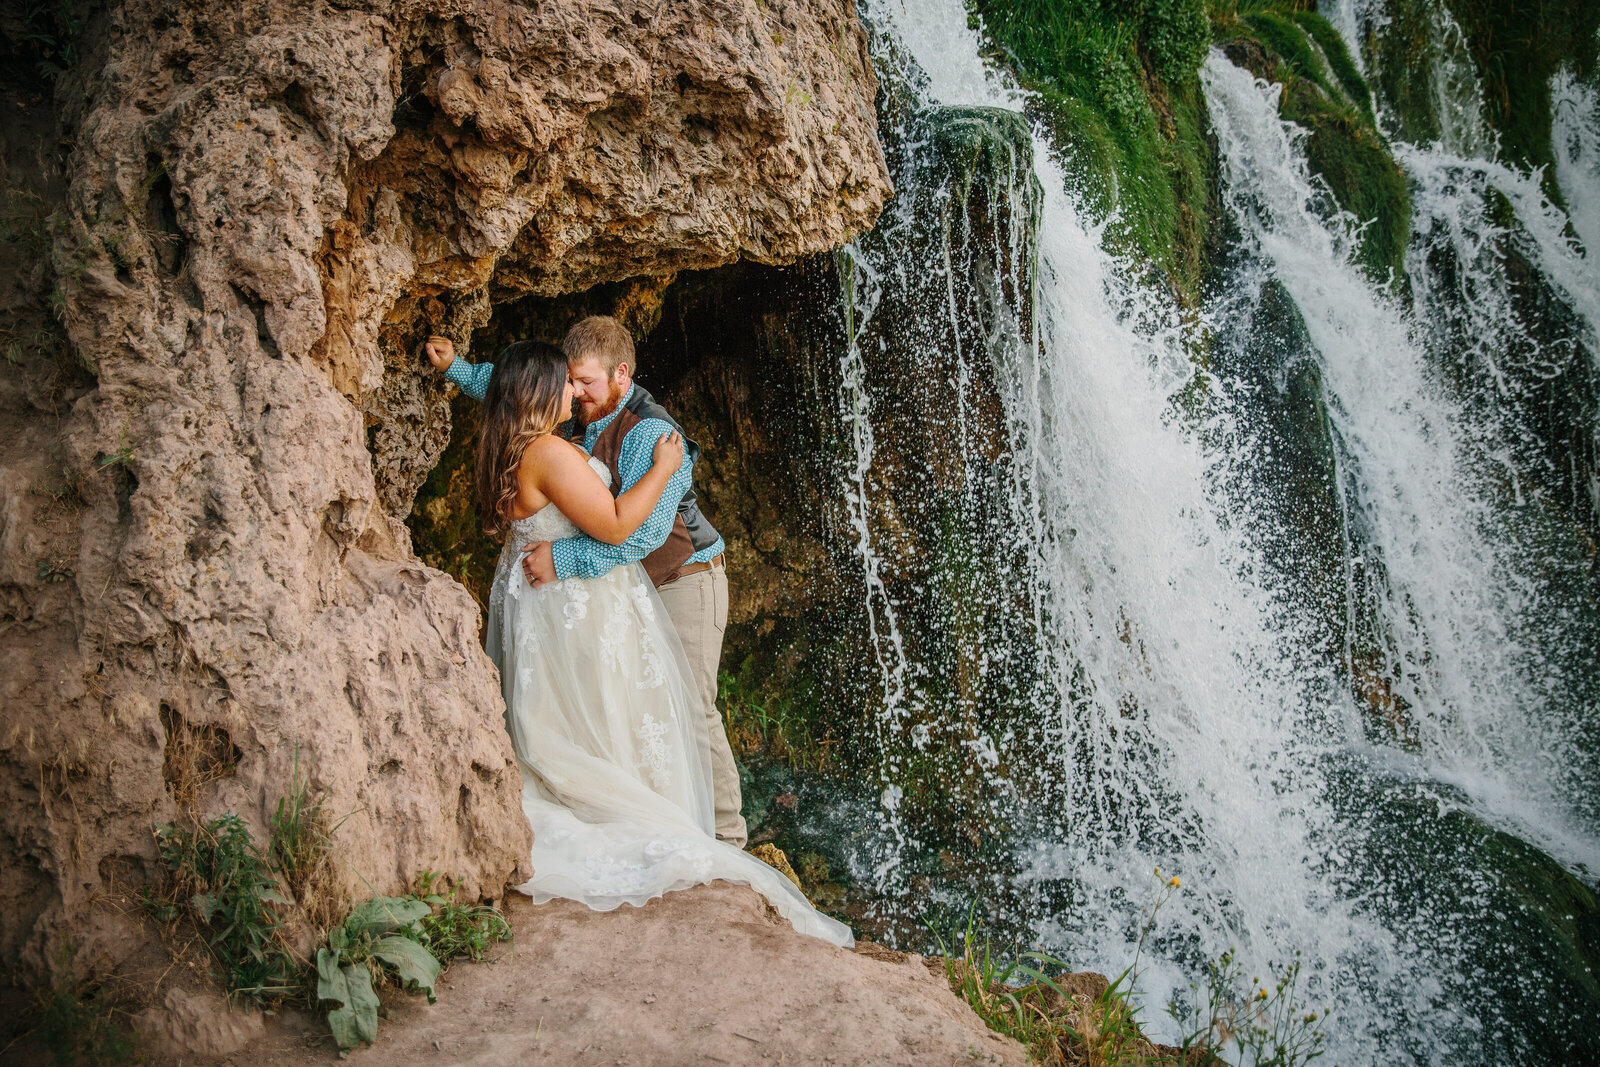 Jackson Hole photographers capture waterfall bridals with couple kissing